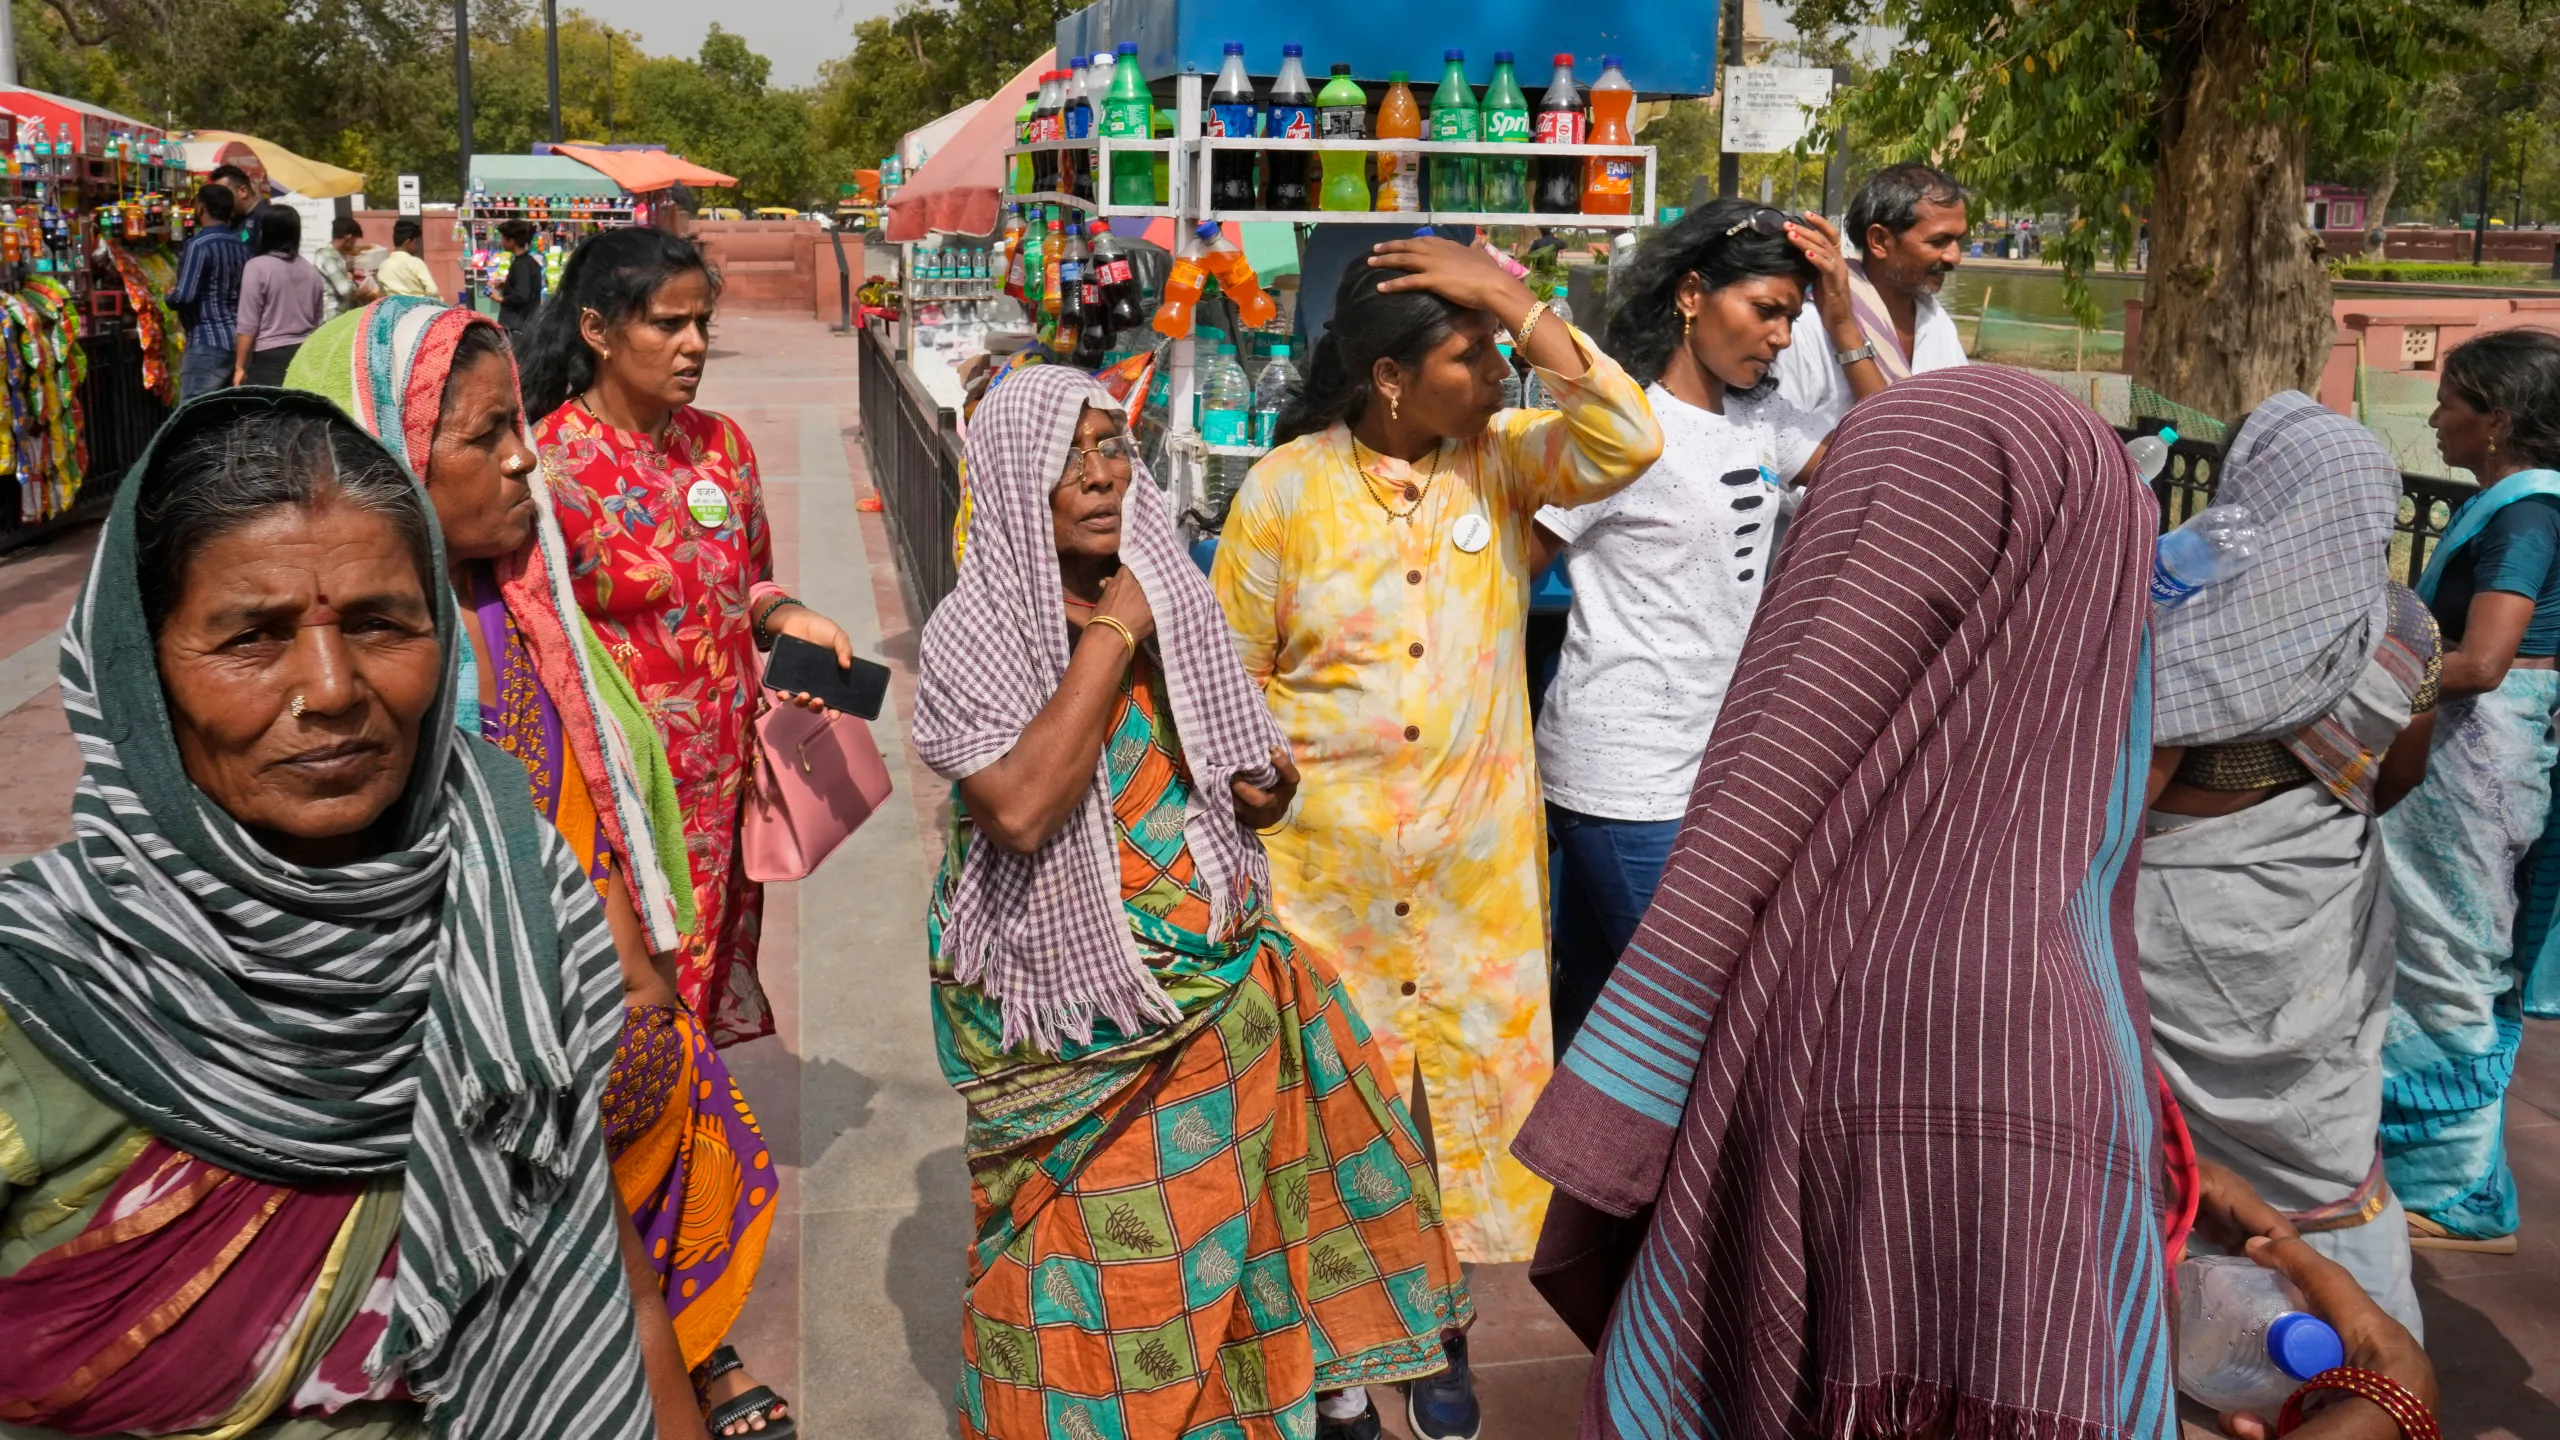 Heatwaves in India: Why Local Data and Community Solutions Matter